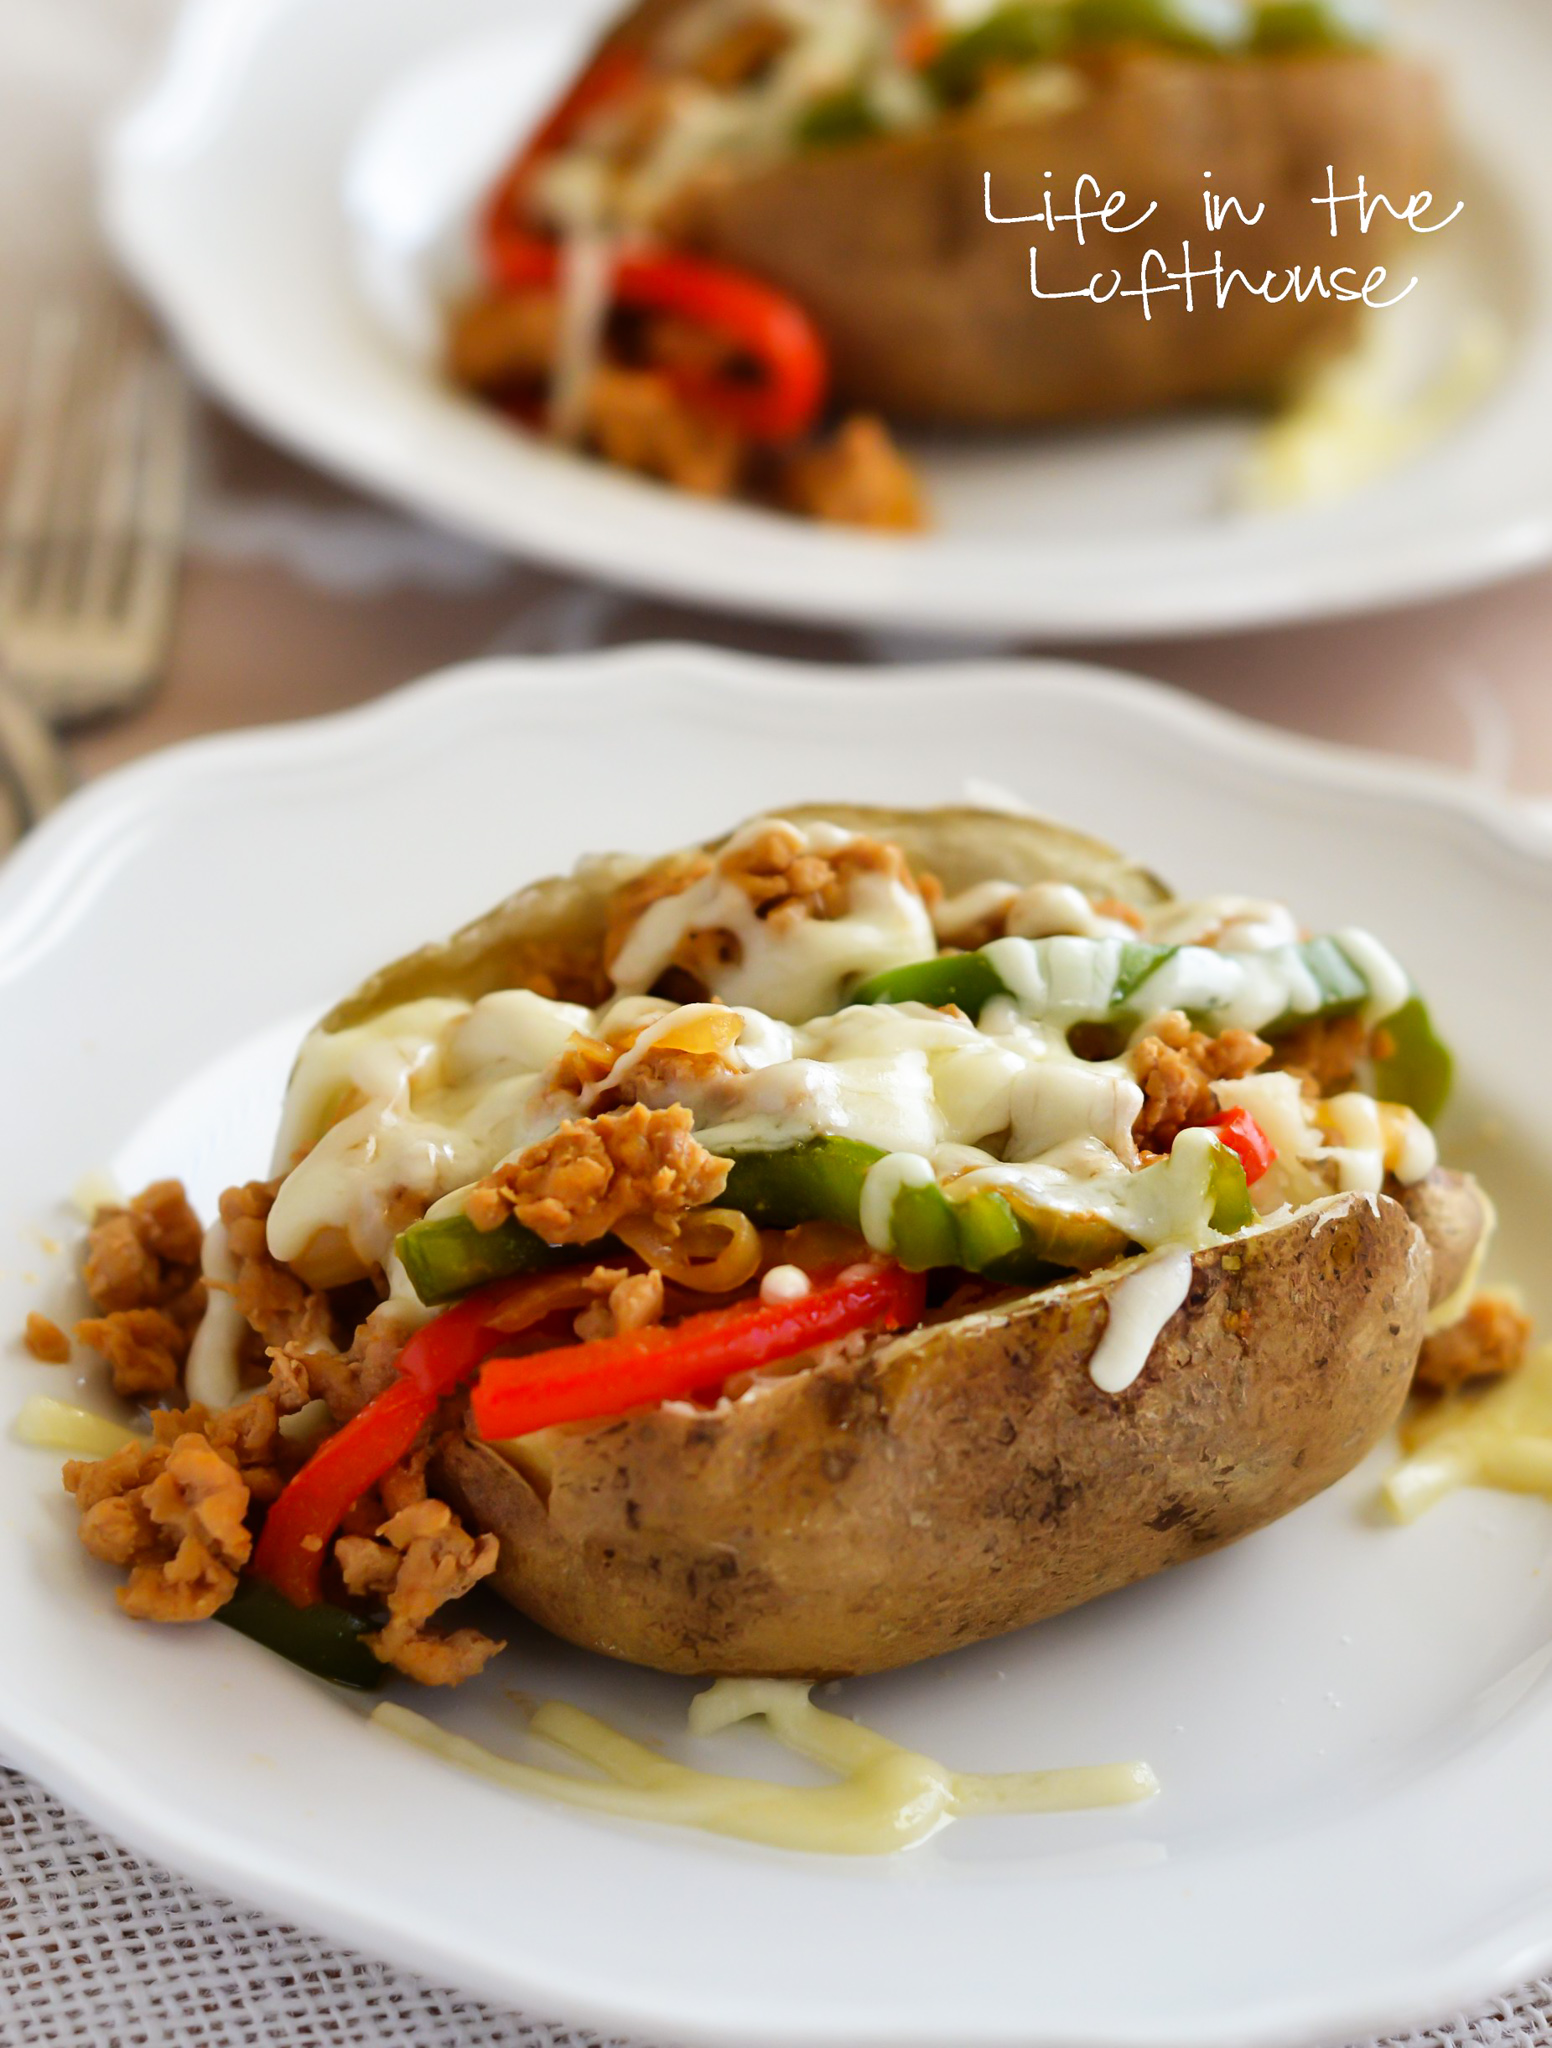 Baked Potatoes topped with a chicken cheesesteak filling. Life-in-the-Lofthouse.com